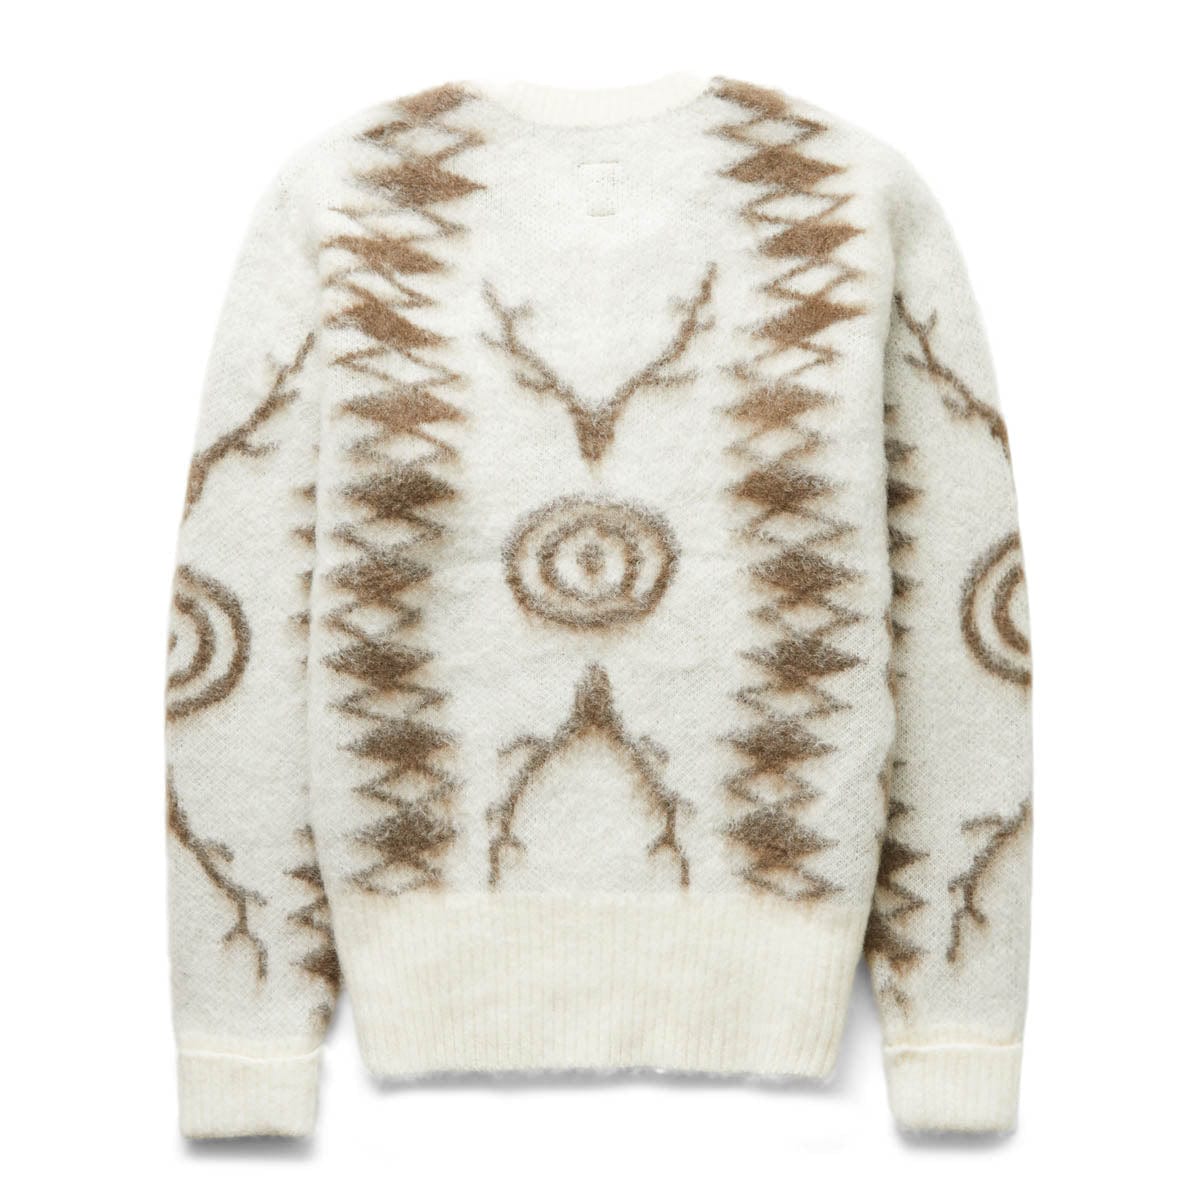 South2 West8 Knitwear LOOSE FIT SWEATER